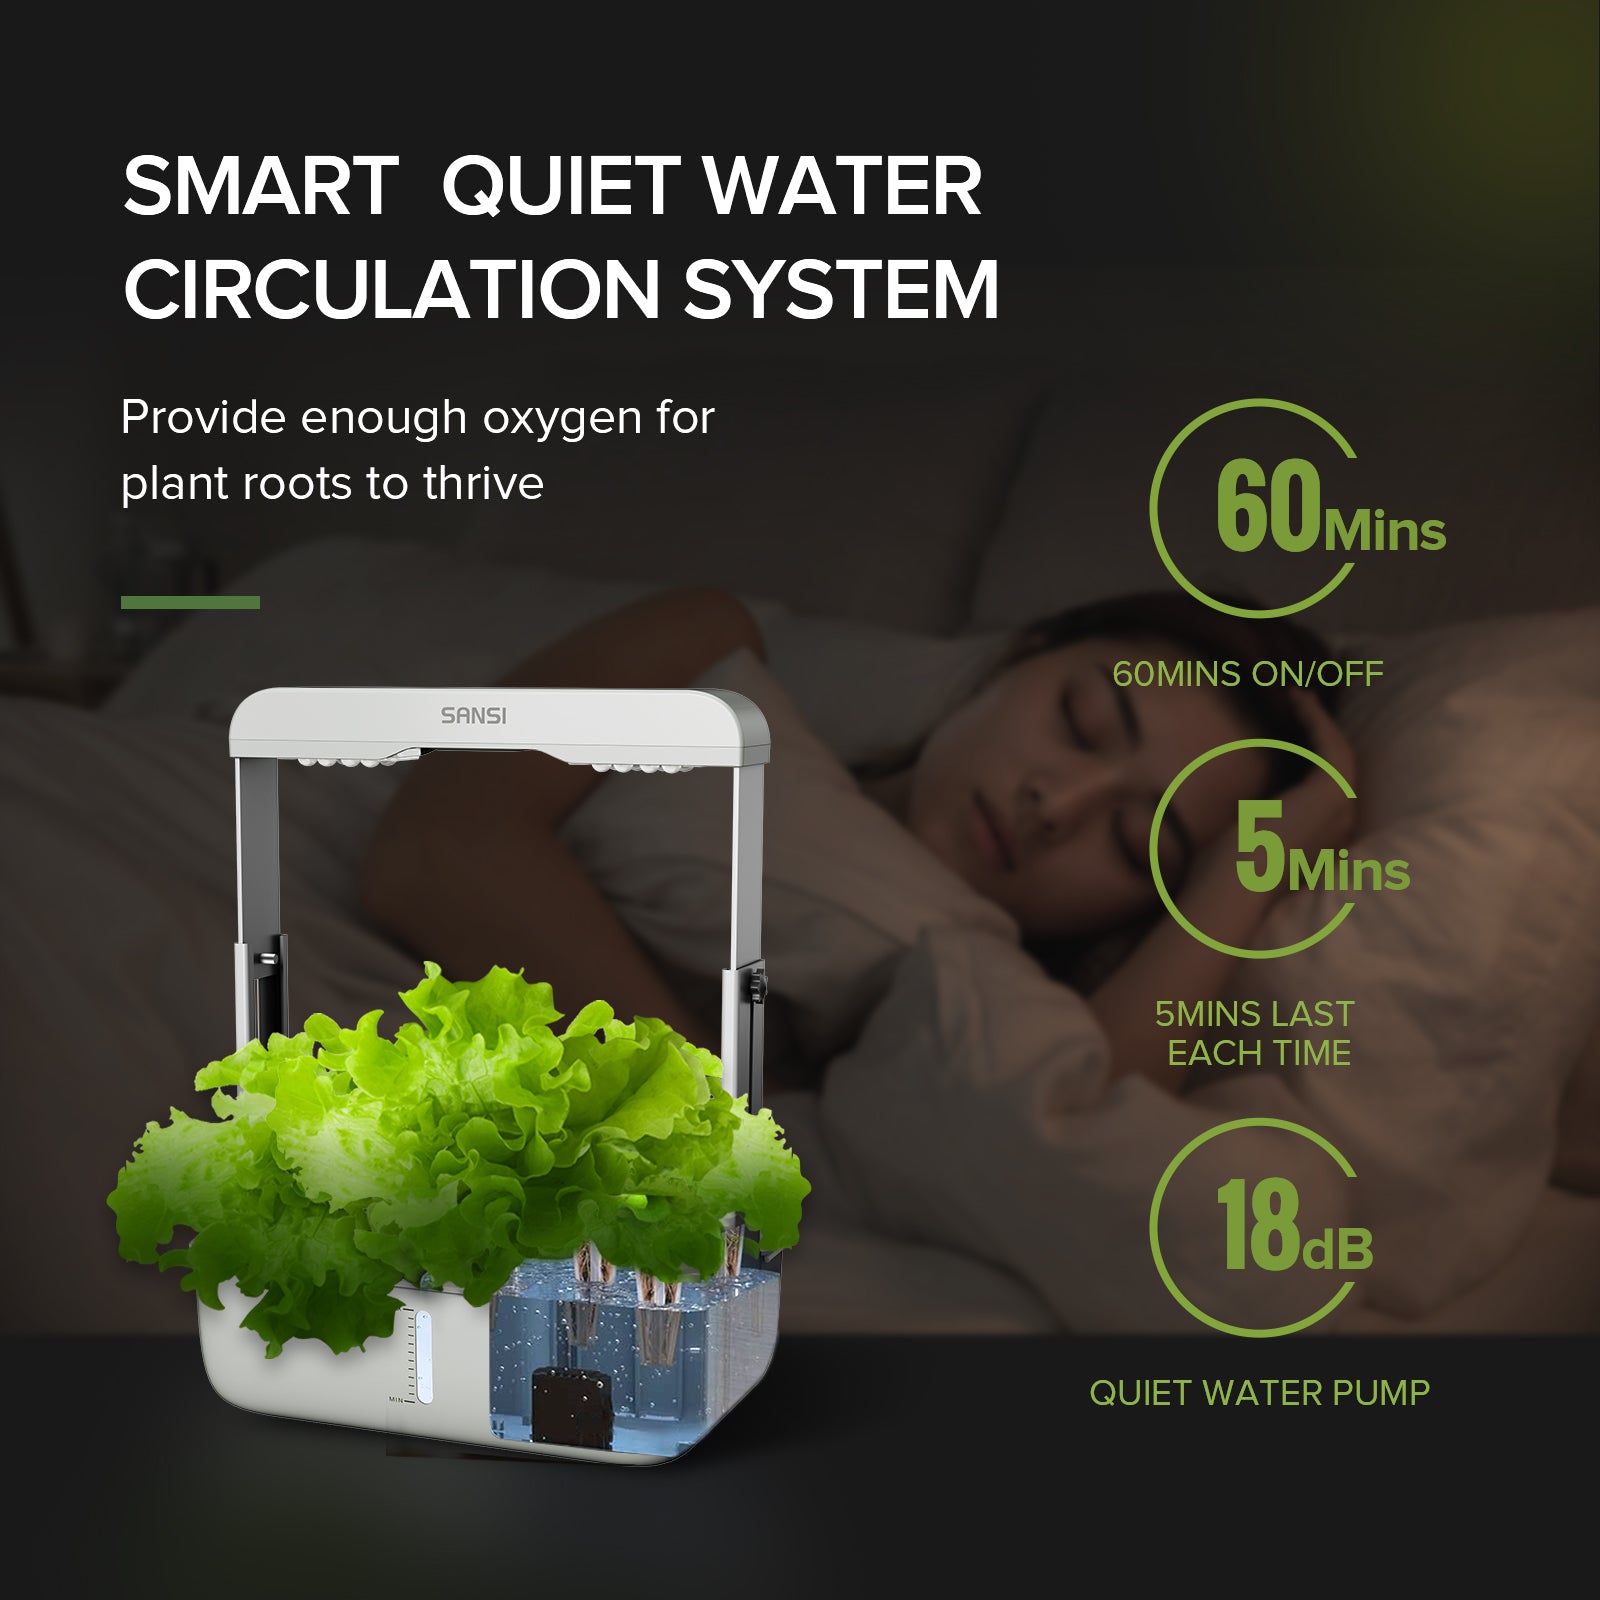 Smart quiet water circulation system，provides enough oxygen for plants roots to thrive.